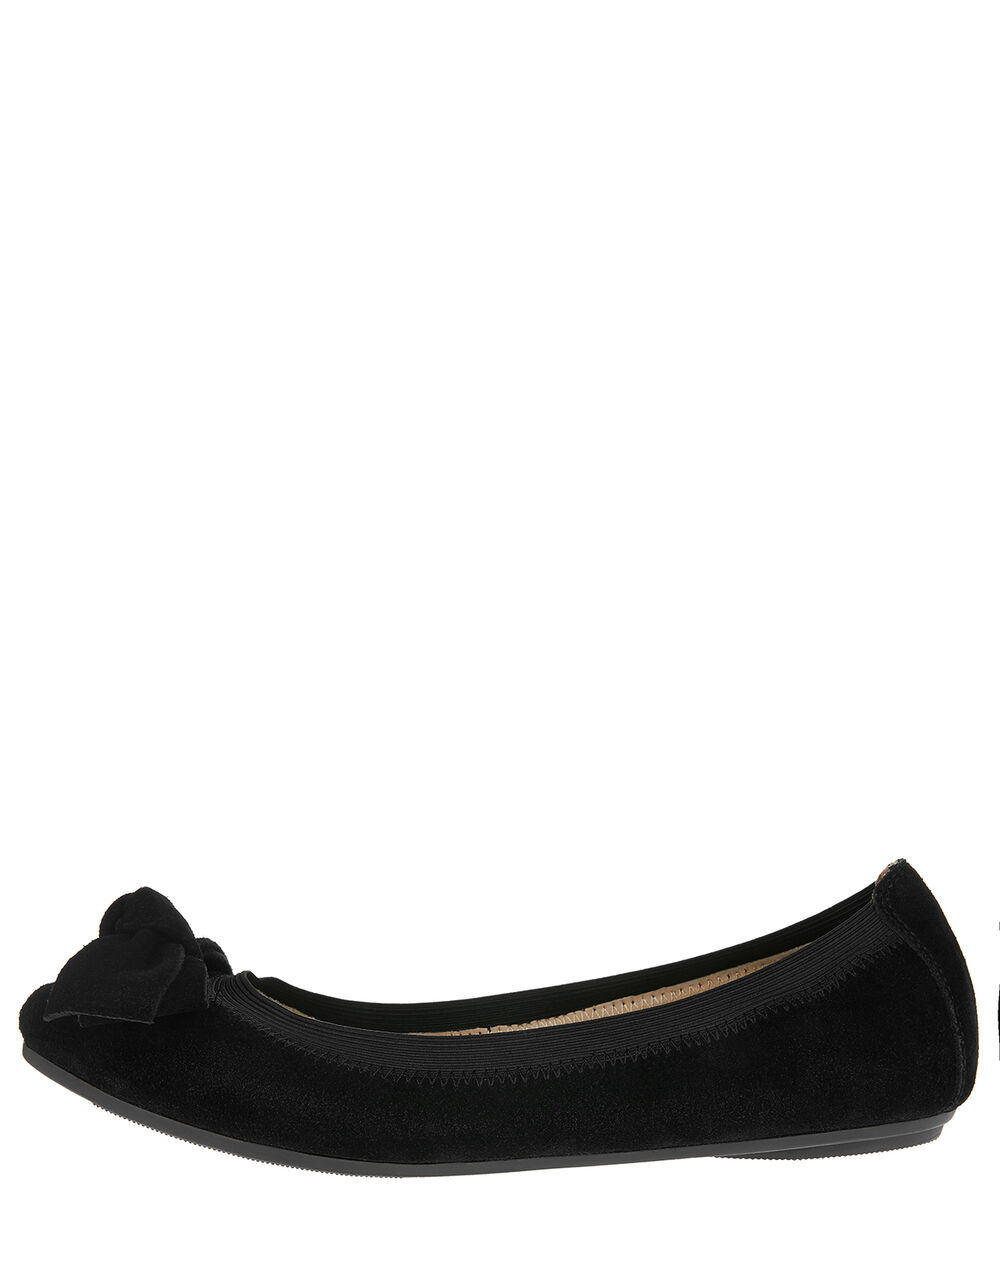 Suede Elasticated Ballerina Flats with Bow Black | Flat shoes ...